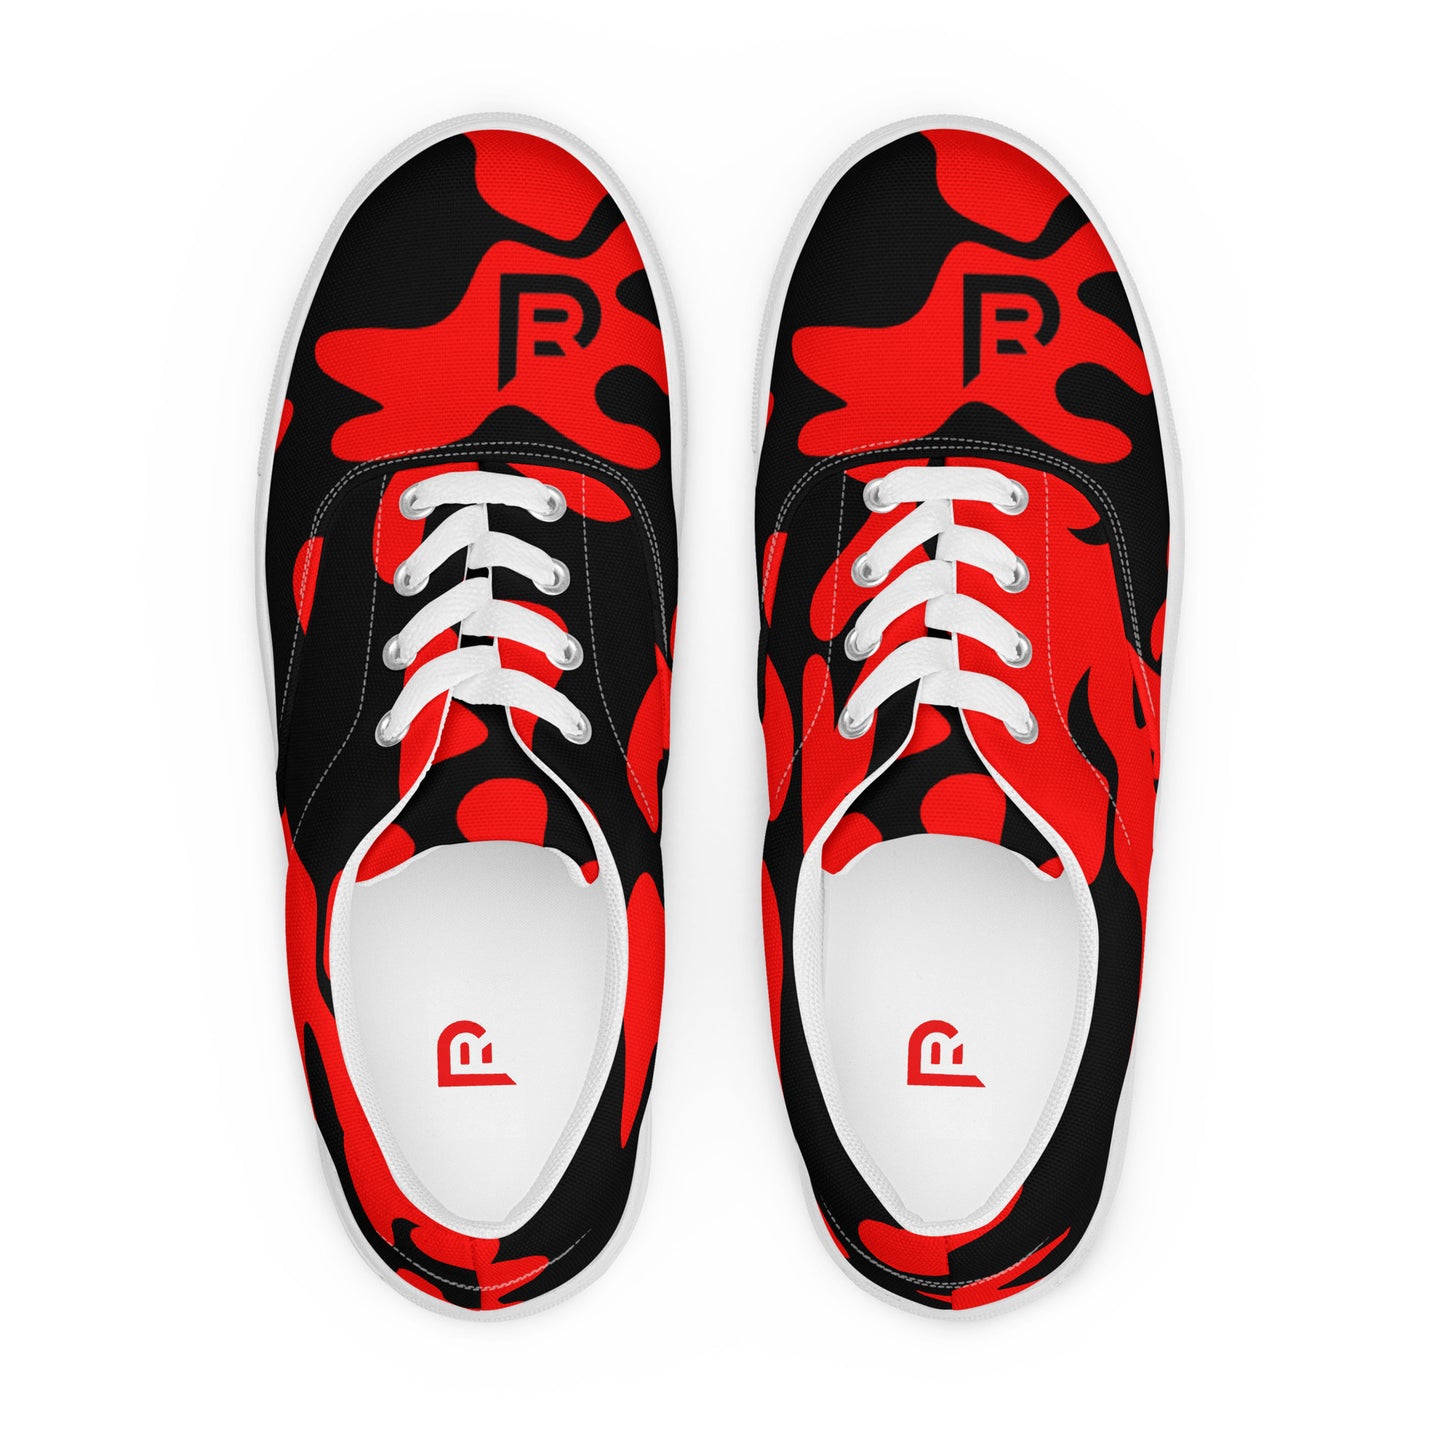 Red Weapon lace-up canvas shoes